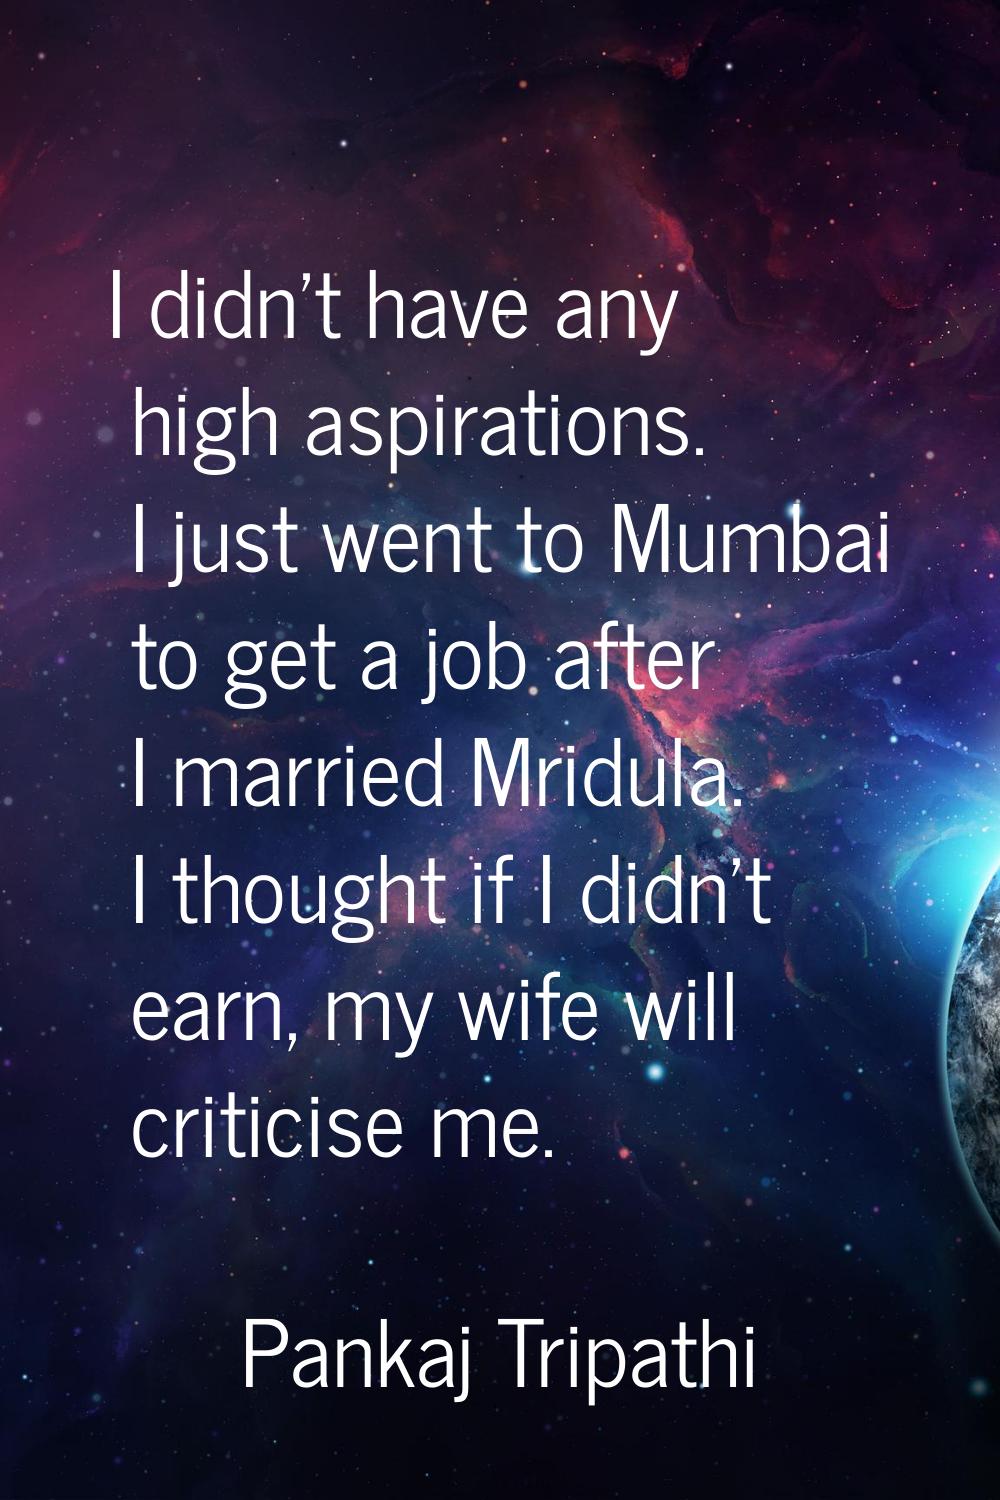 I didn't have any high aspirations. I just went to Mumbai to get a job after I married Mridula. I t